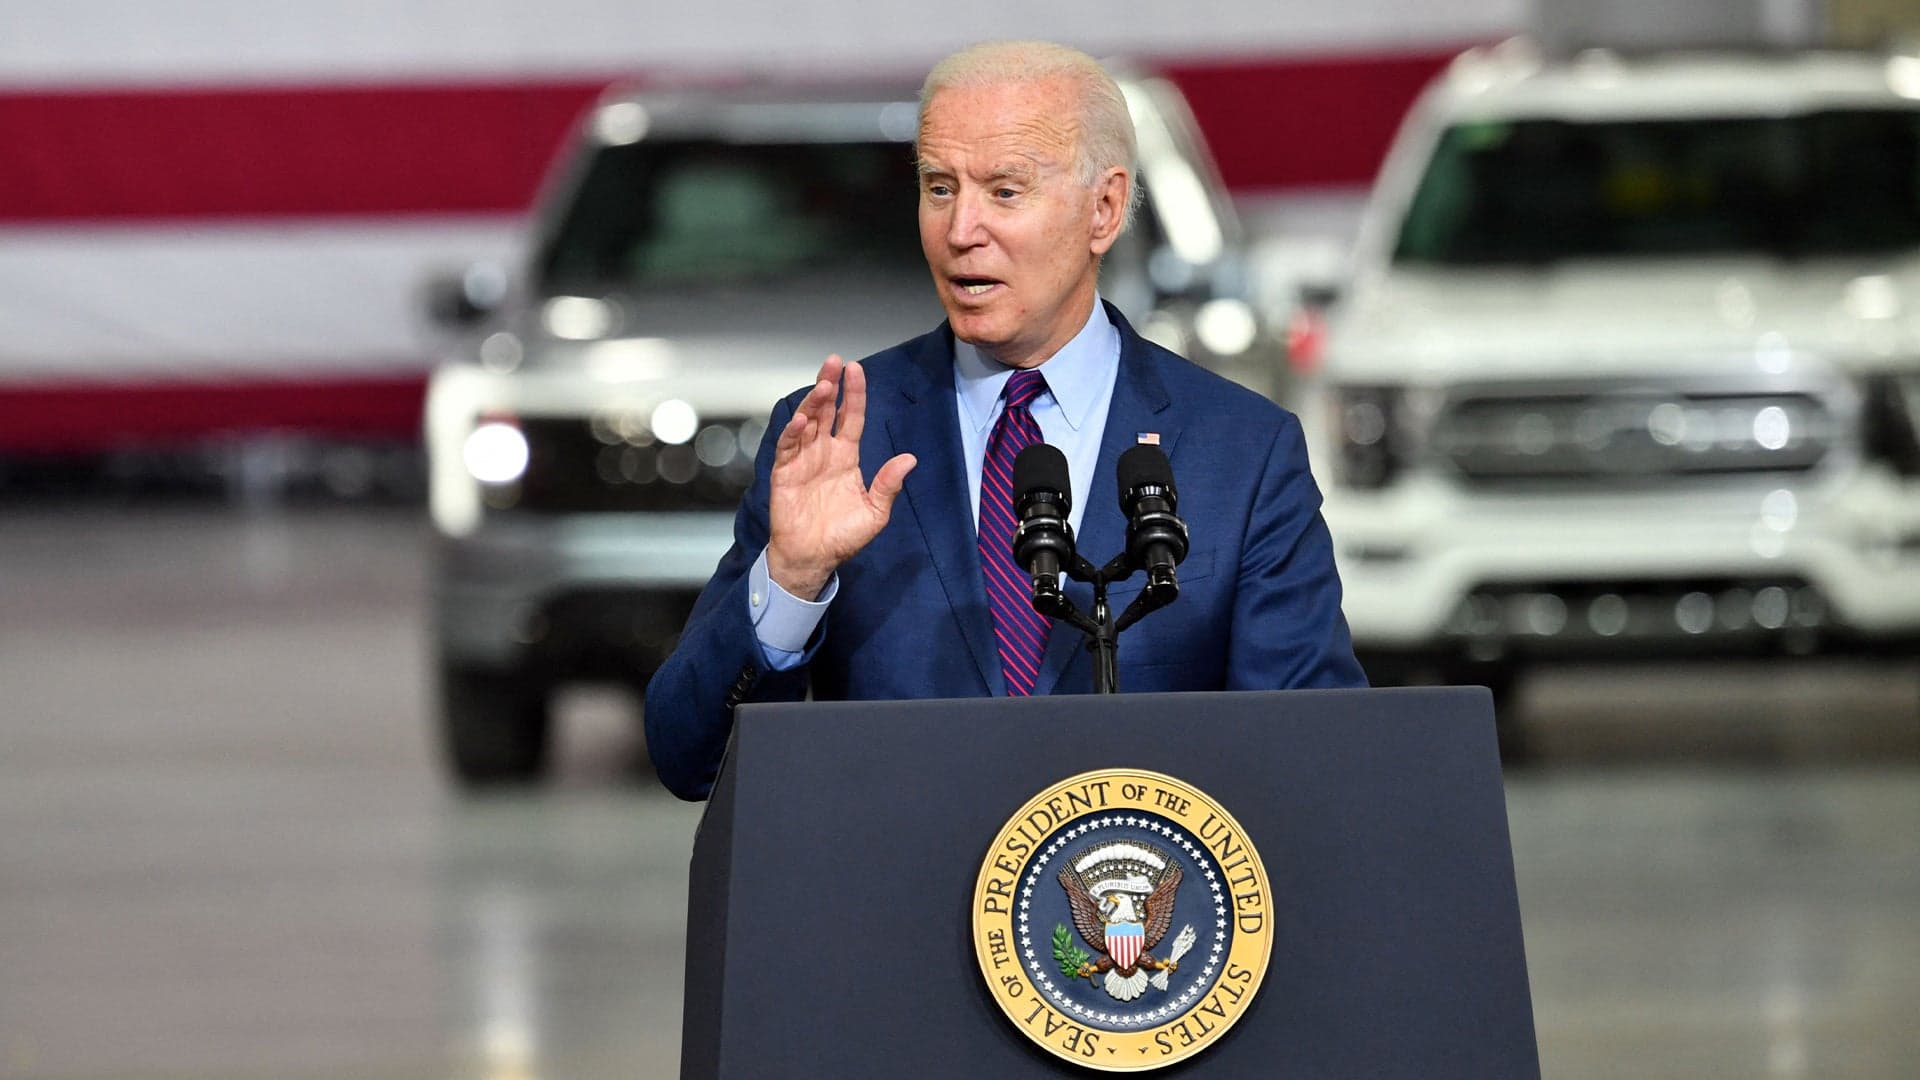 Biden Executive Order Targets Half of New Car Sales to be Electric by 2030